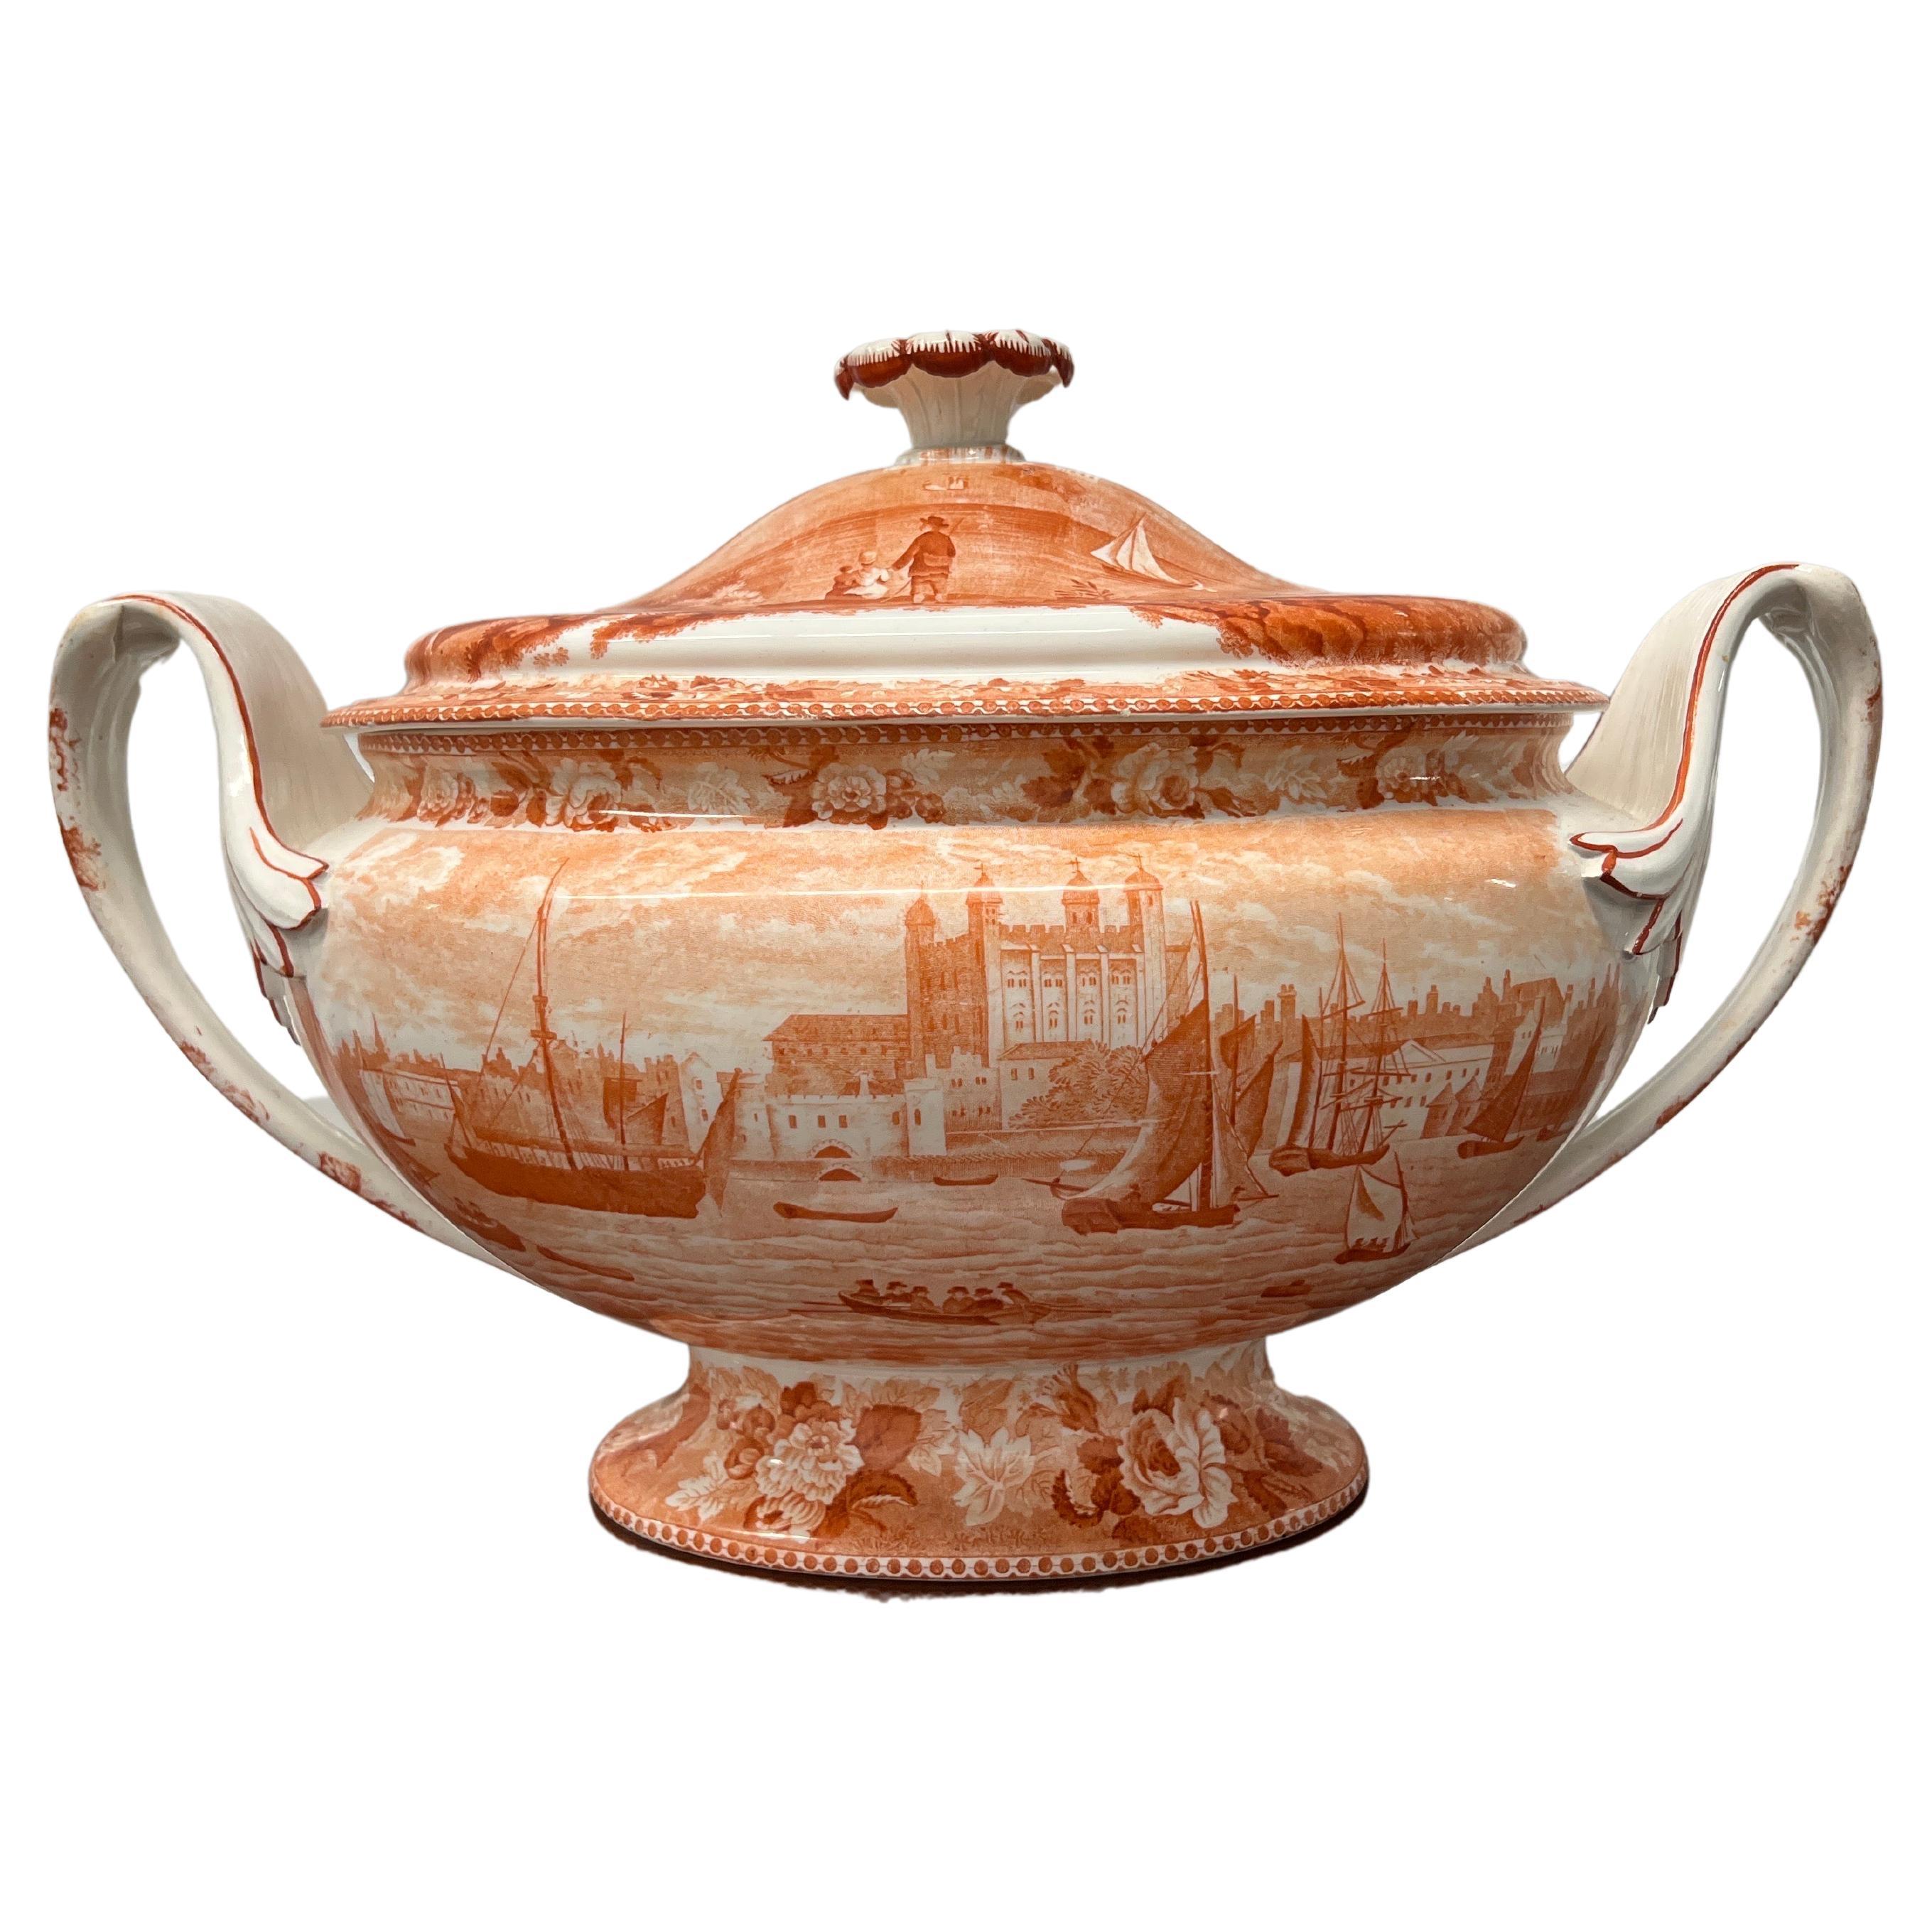 RARE 1840's Wedgwood "Tower Of London" In Orange Transfer Pearlware Tureen  For Sale